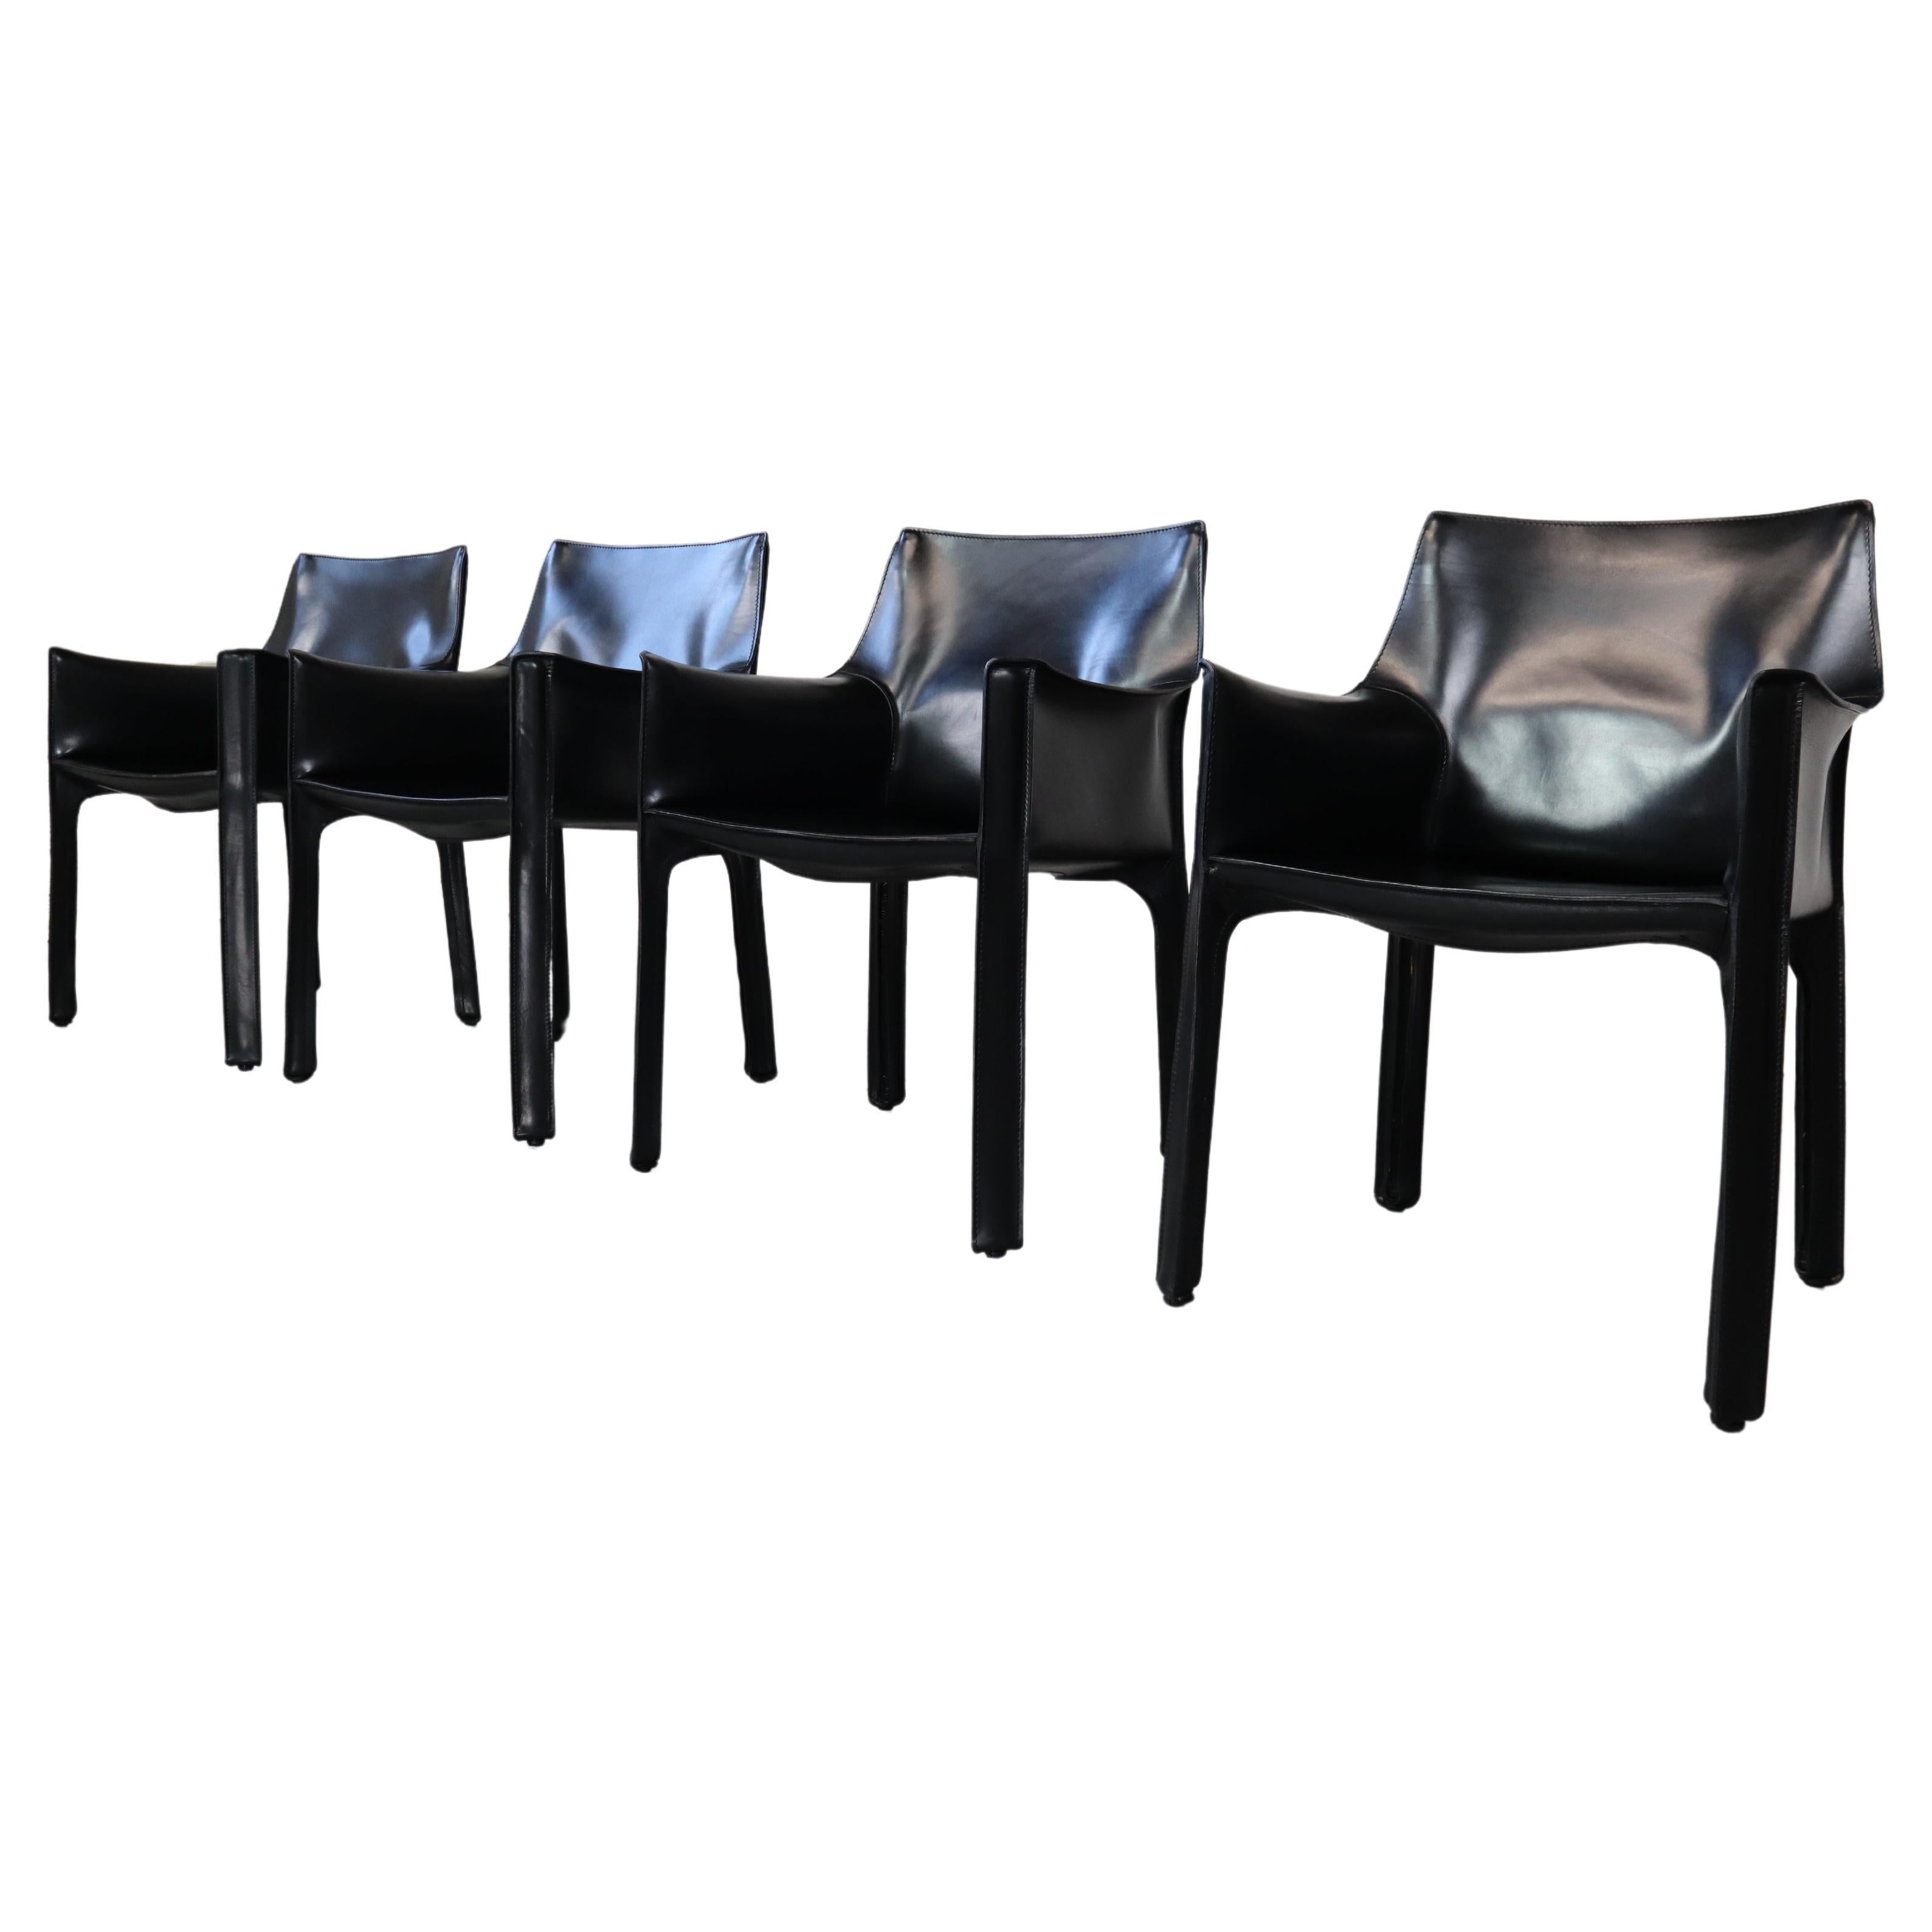 Cab 413 armchairs in black leather by Mario Bellini for Cassina